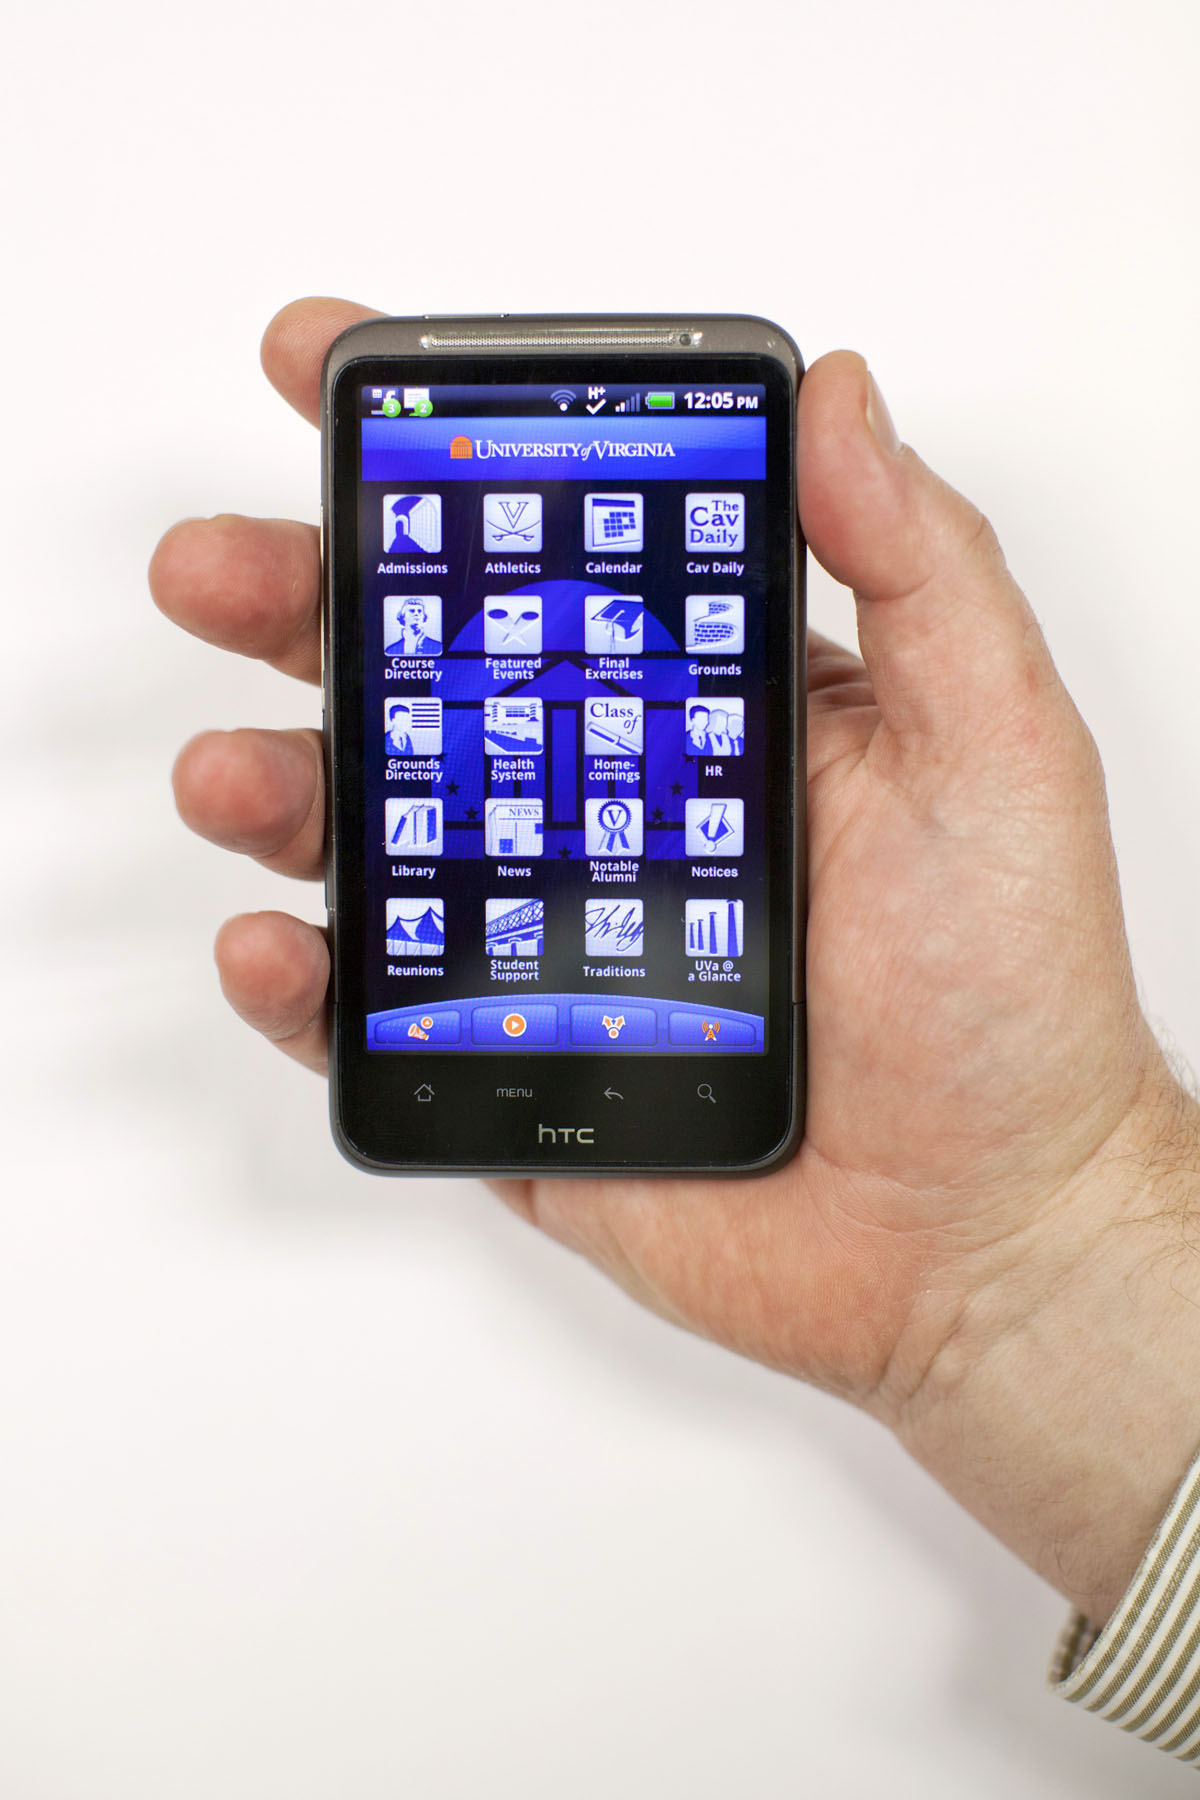 Person holding a phone with a app open with many icons about various UVA departments